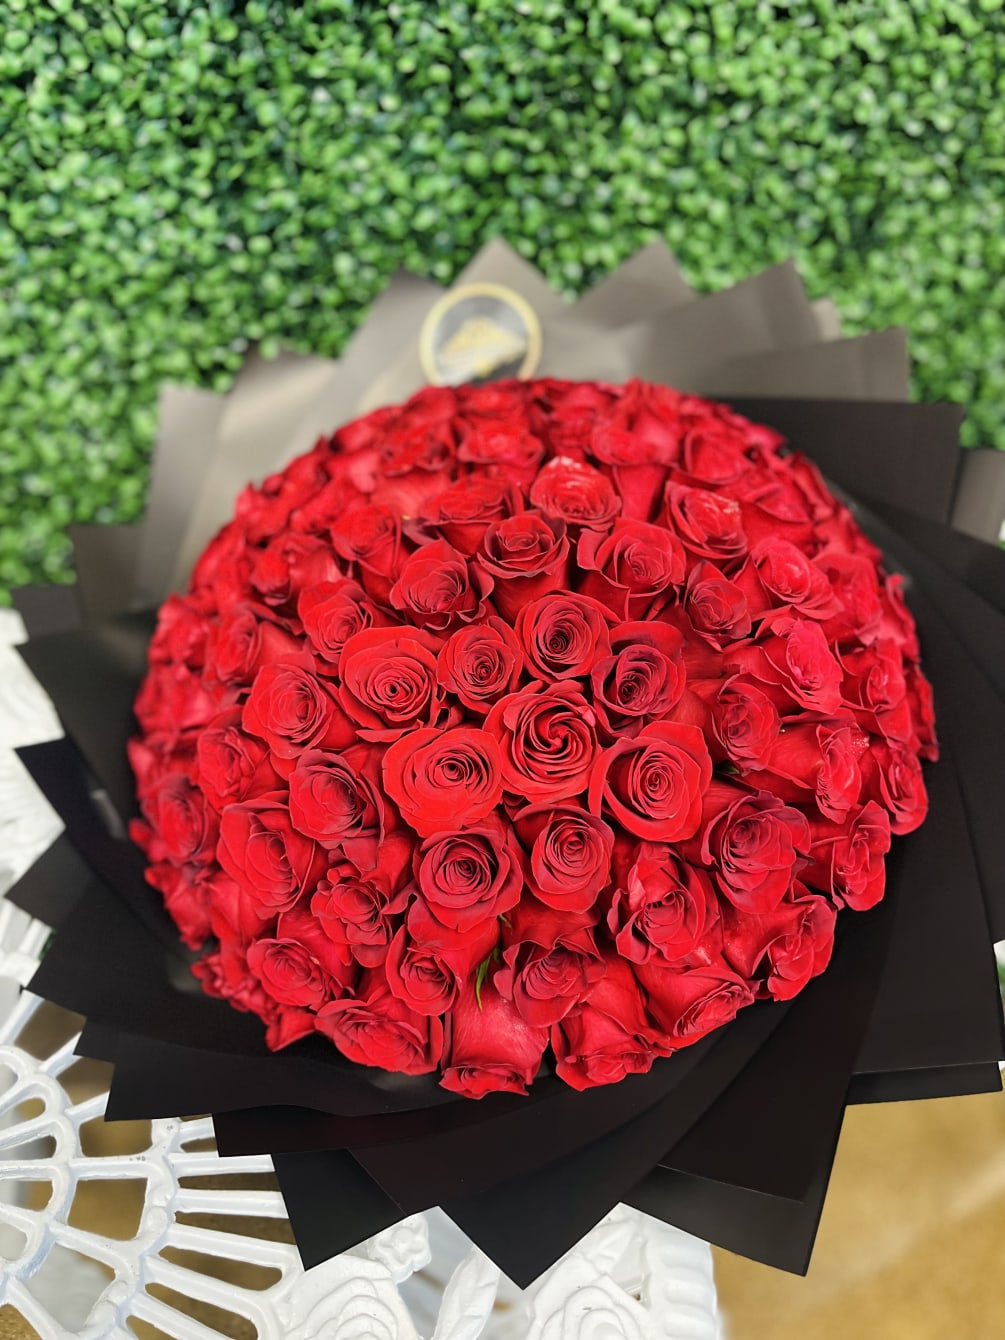 100 Long Stem Red Roses. Meticulously Wrapped with black paper with a